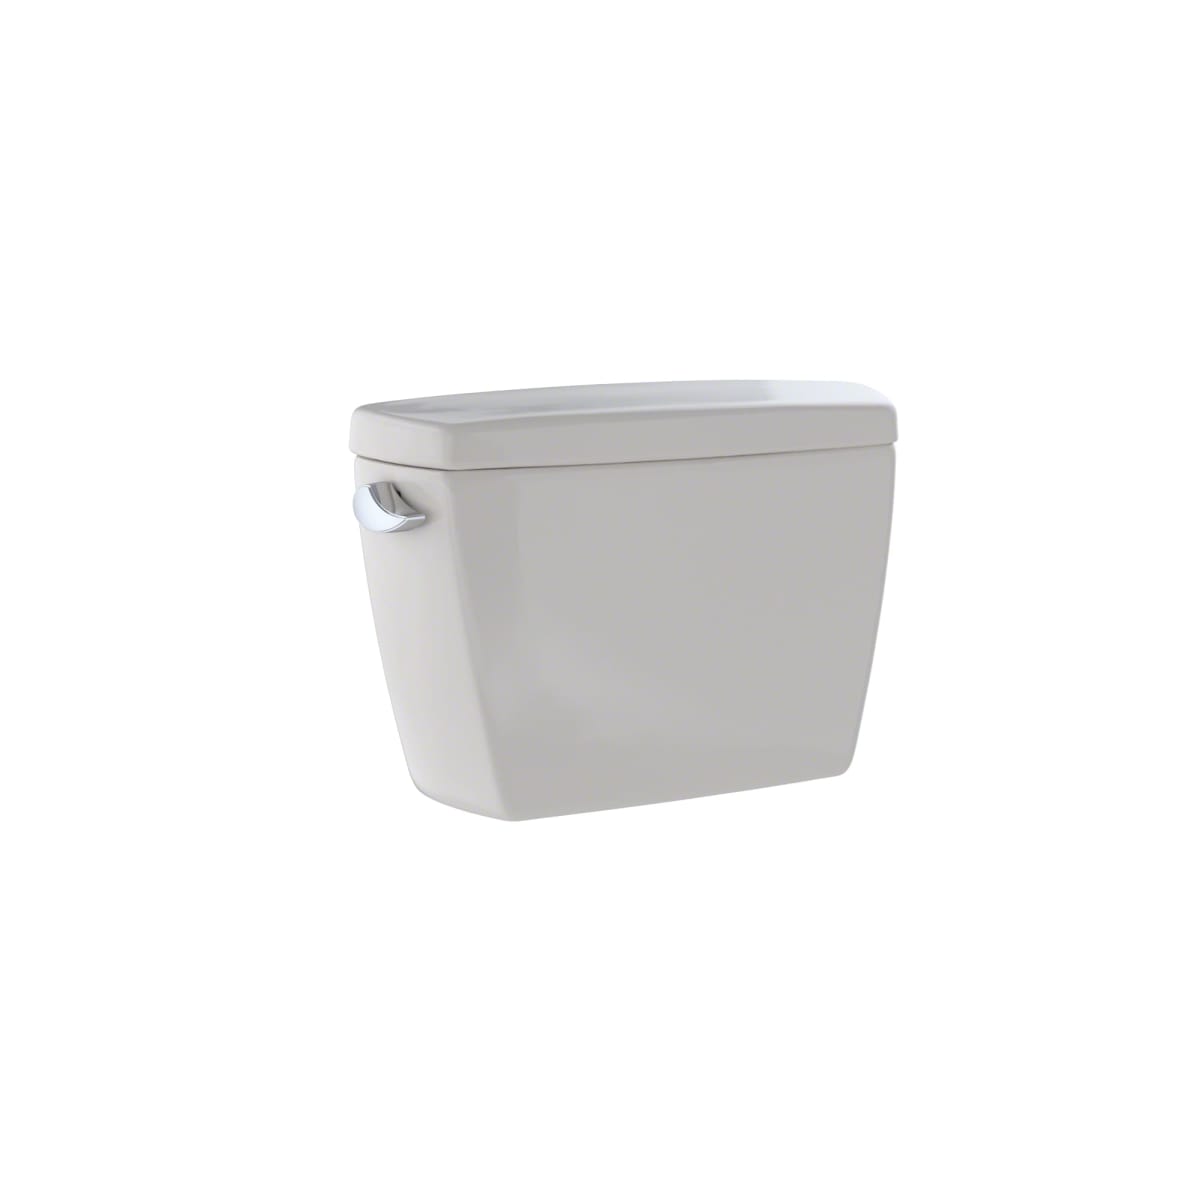 Toto ST743S#01 Toilet Tank Cotton White from the Drake Collection 